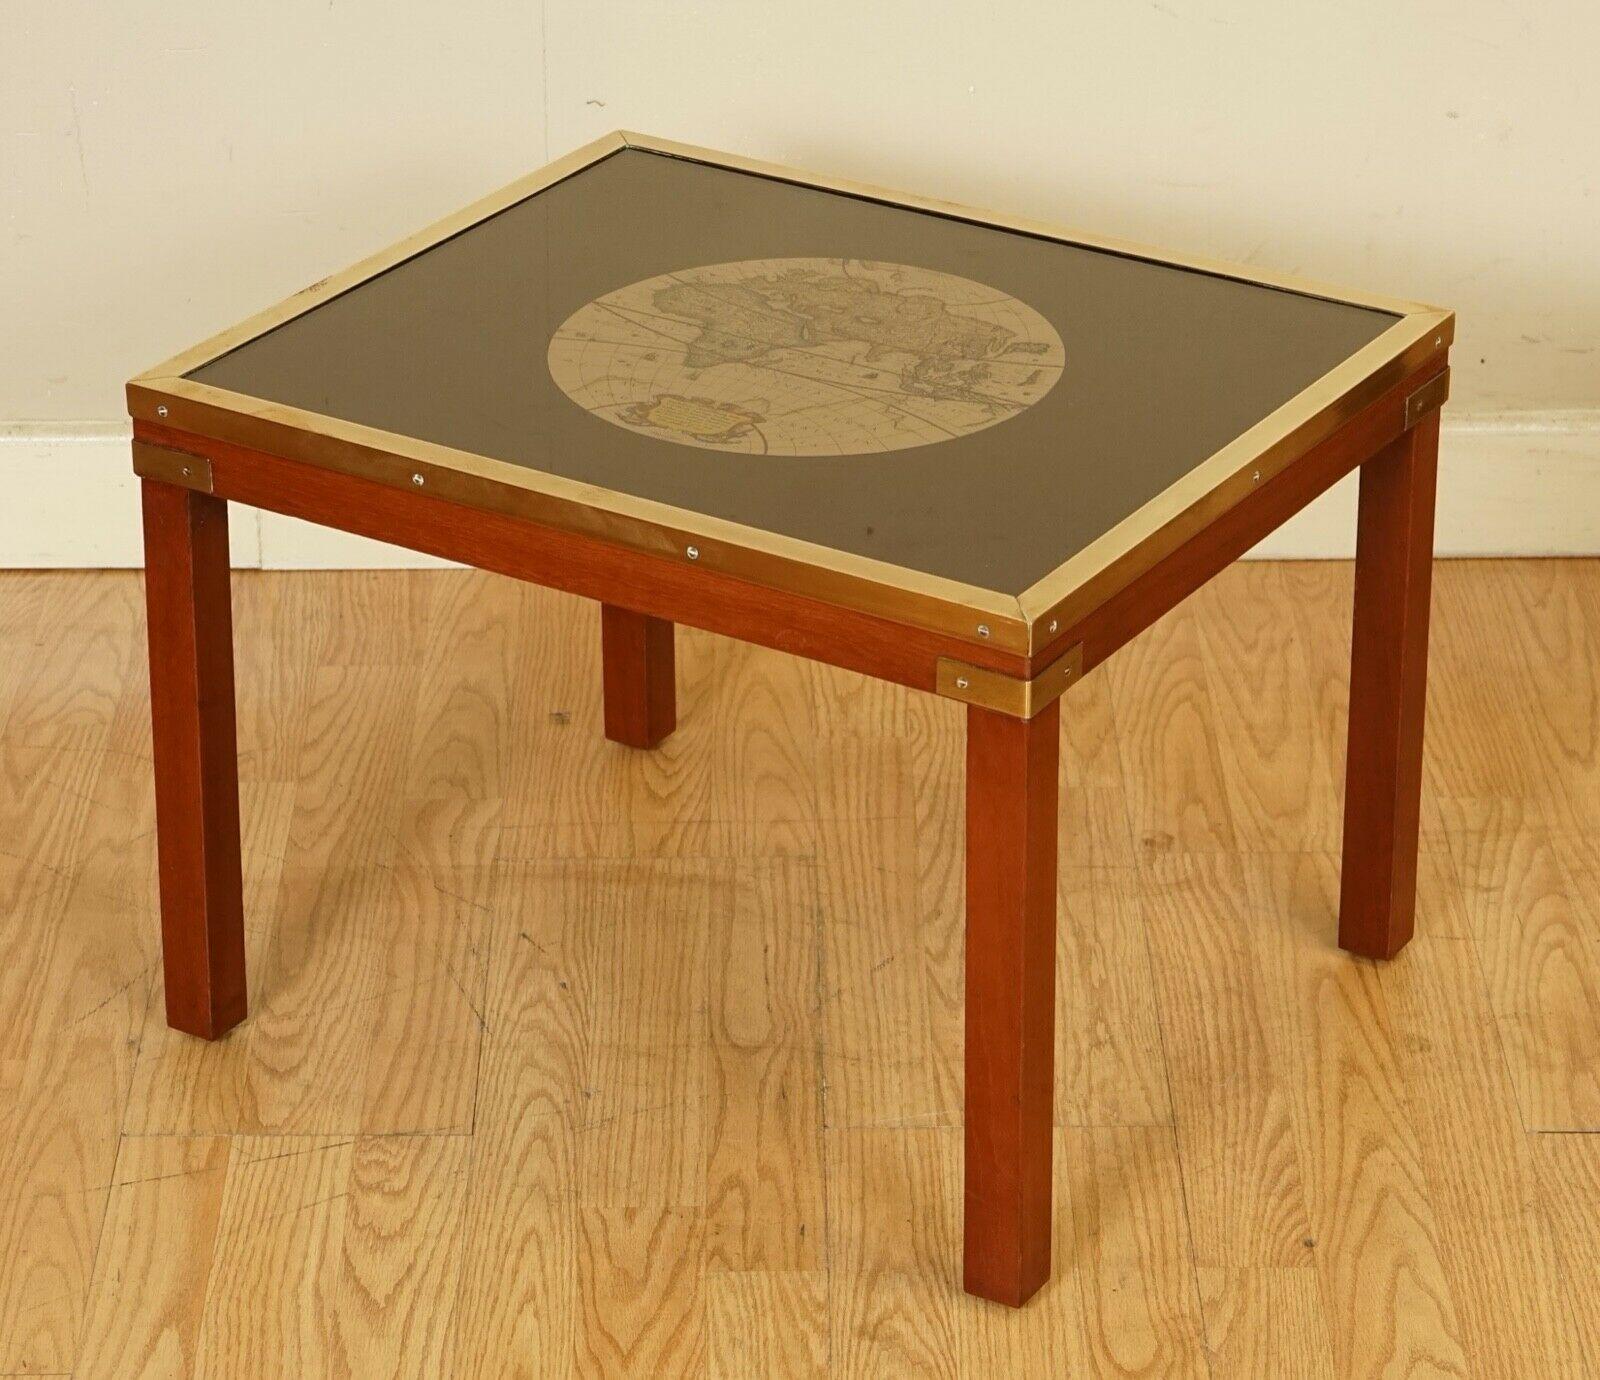 Hand-Crafted Stunning Coffee & Side Table Nest of Tables Military Campaign with World Maps For Sale